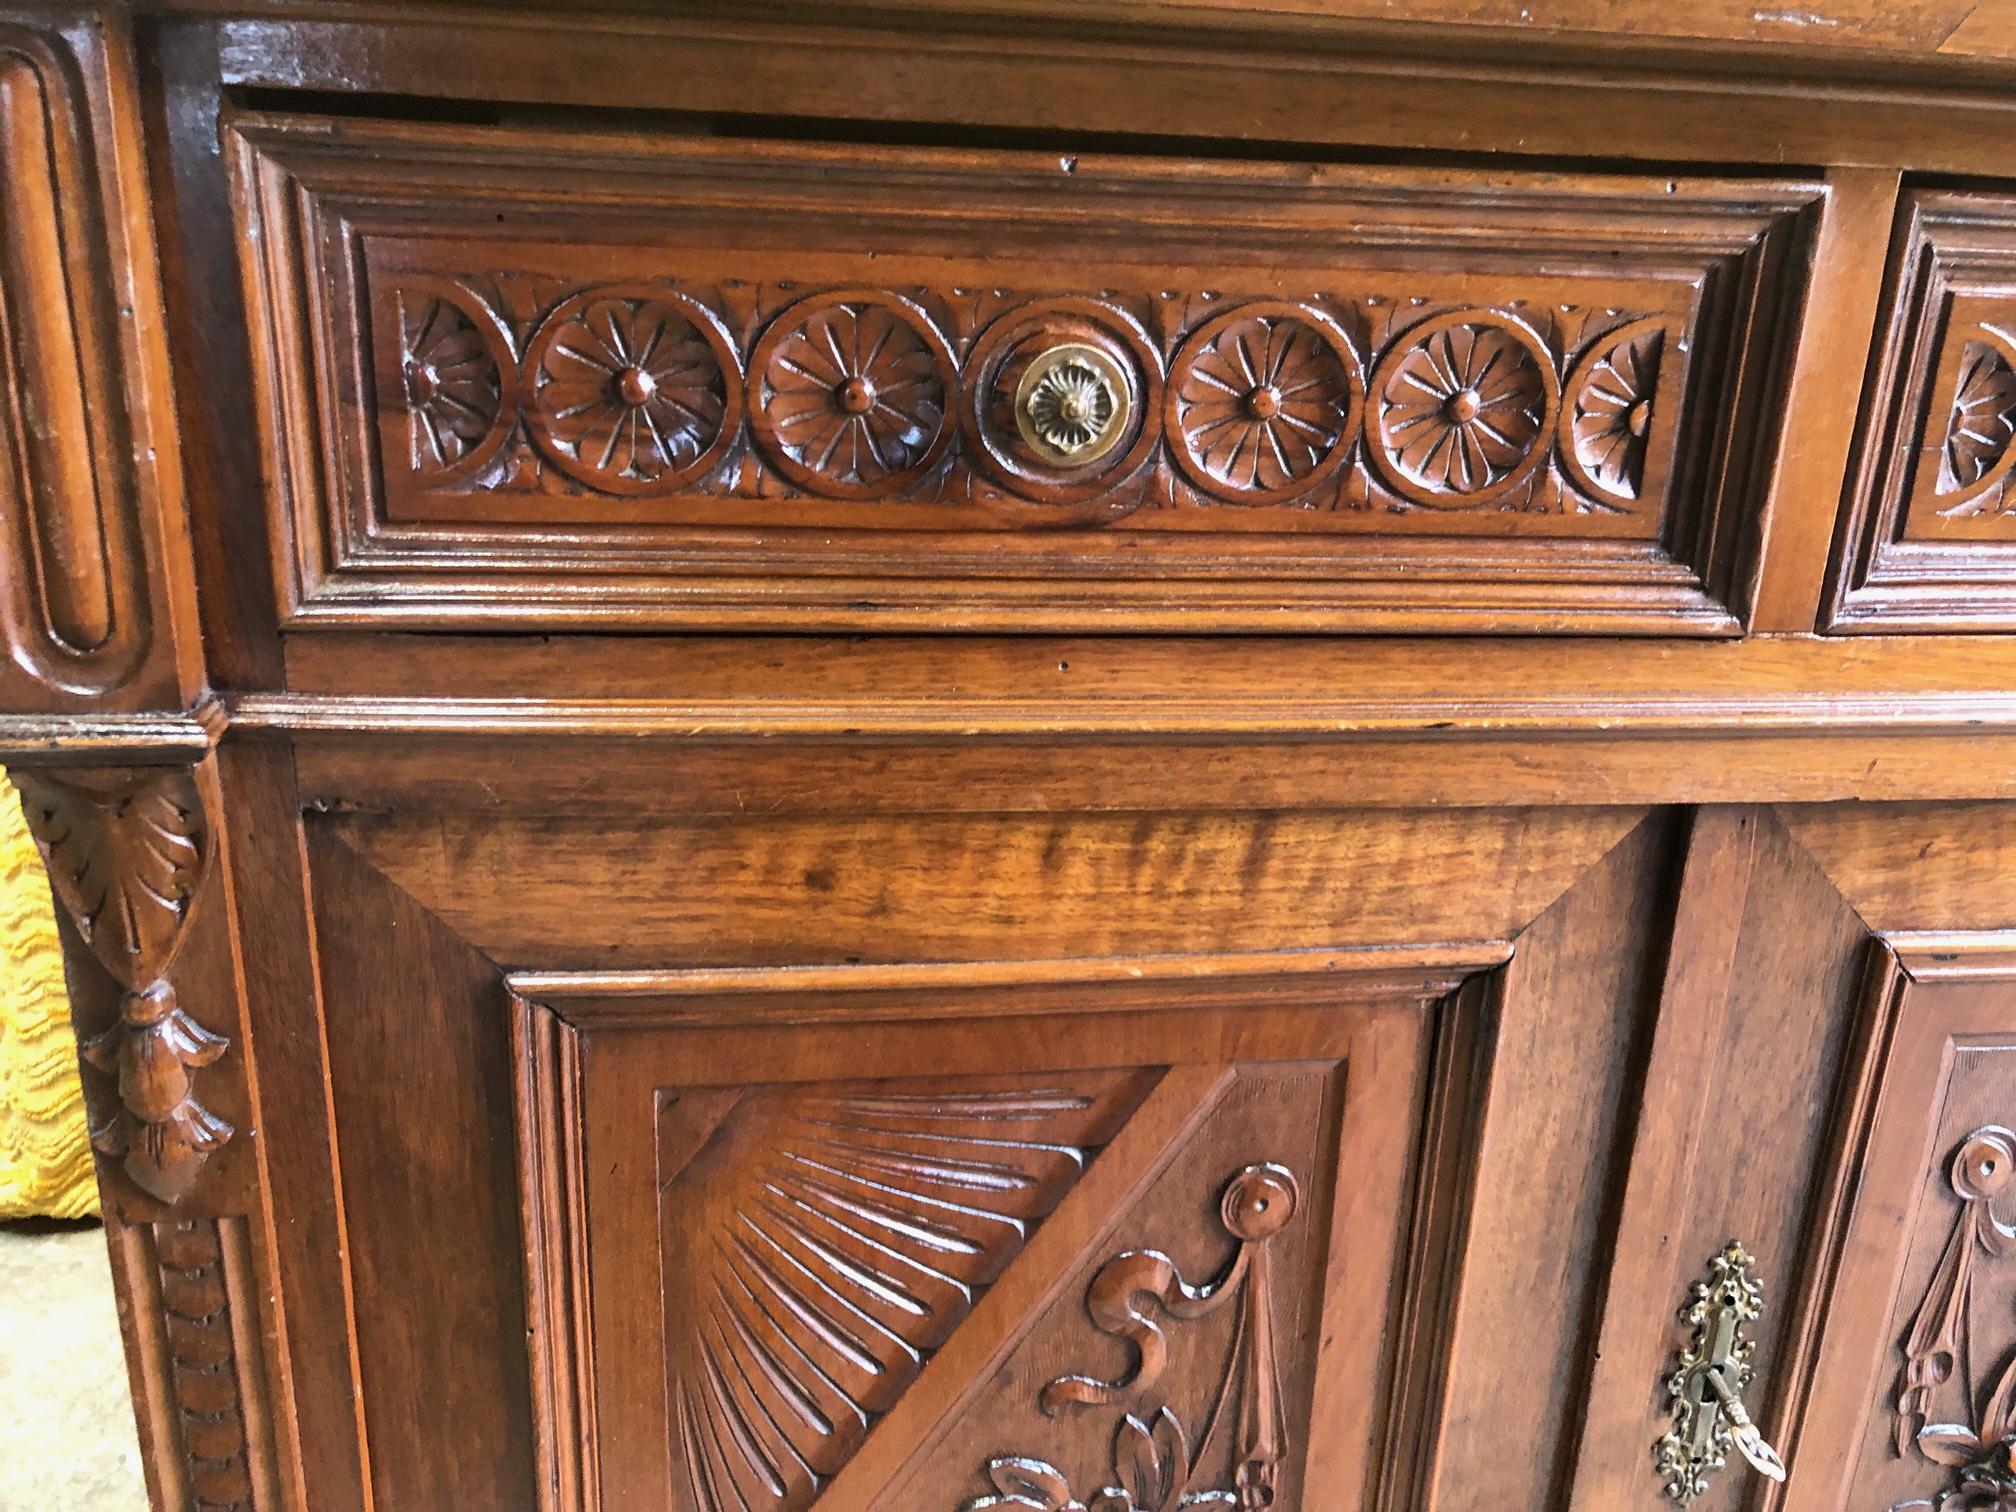 Original 1900 sideboard in hand-carved walnut, has solid wood parts and veneered parts.
Nice design and size.
Comes from an old country house in Buggiano area of Tuscany.
The paint is original in patina, honey amber color. 
As shown in the